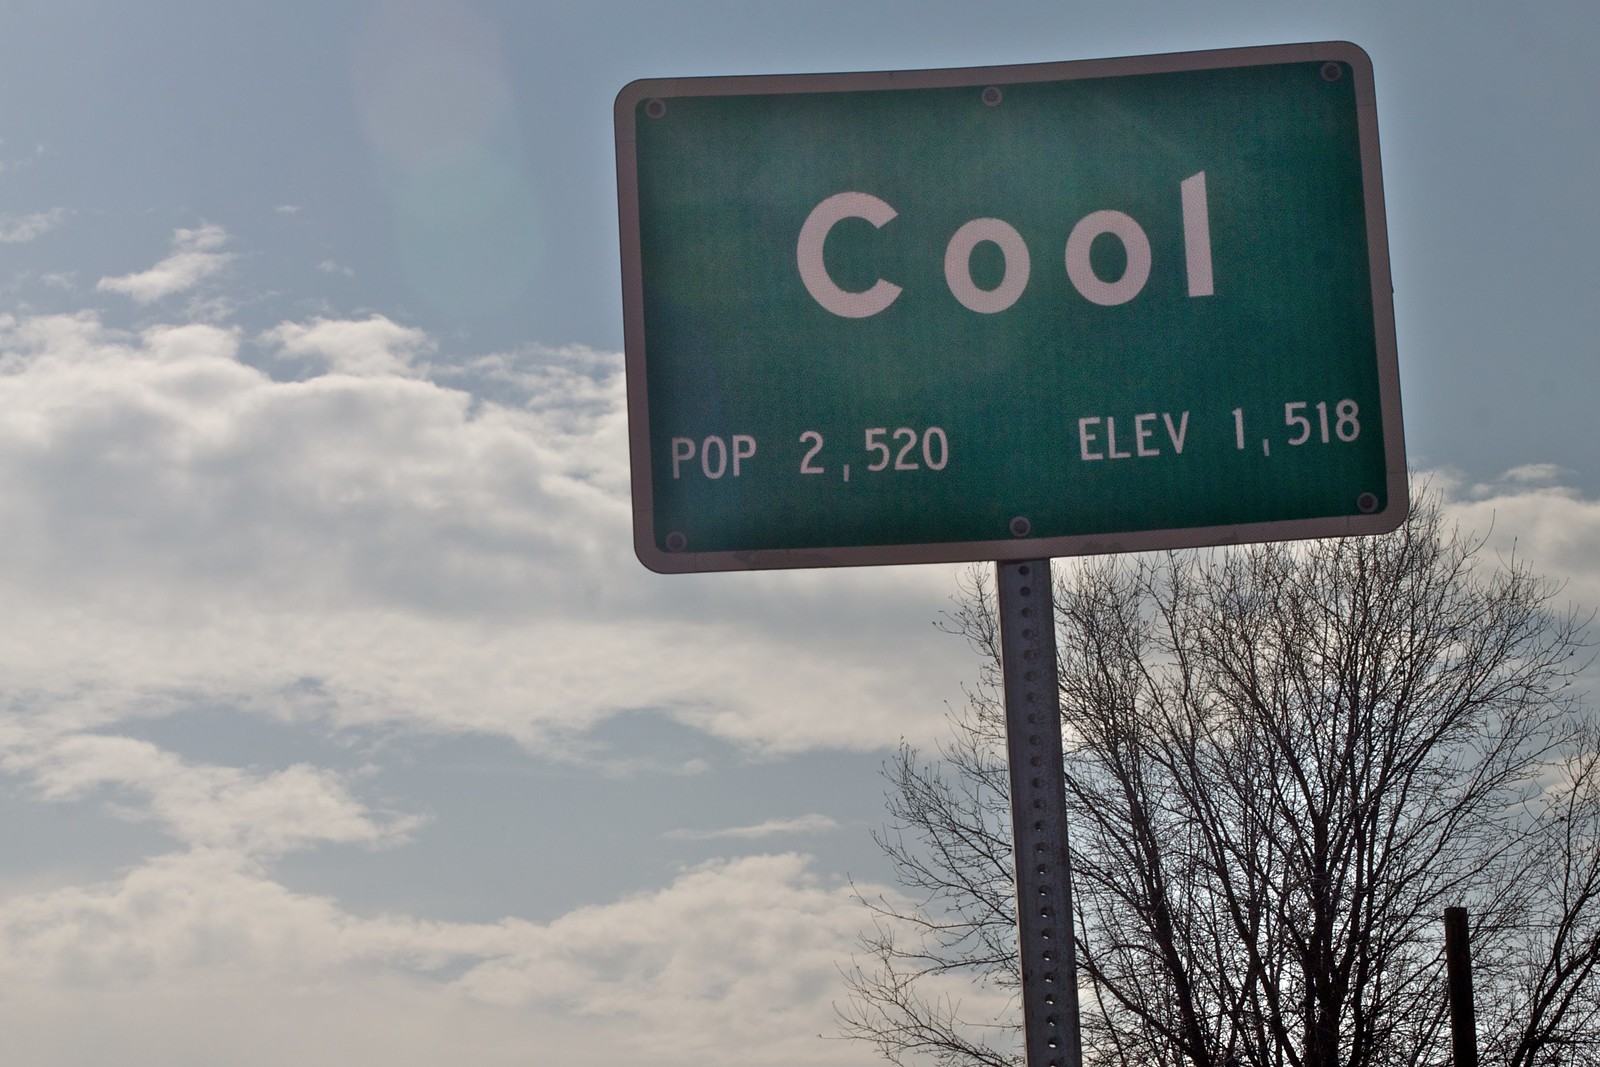 Road sign for a town named Cool